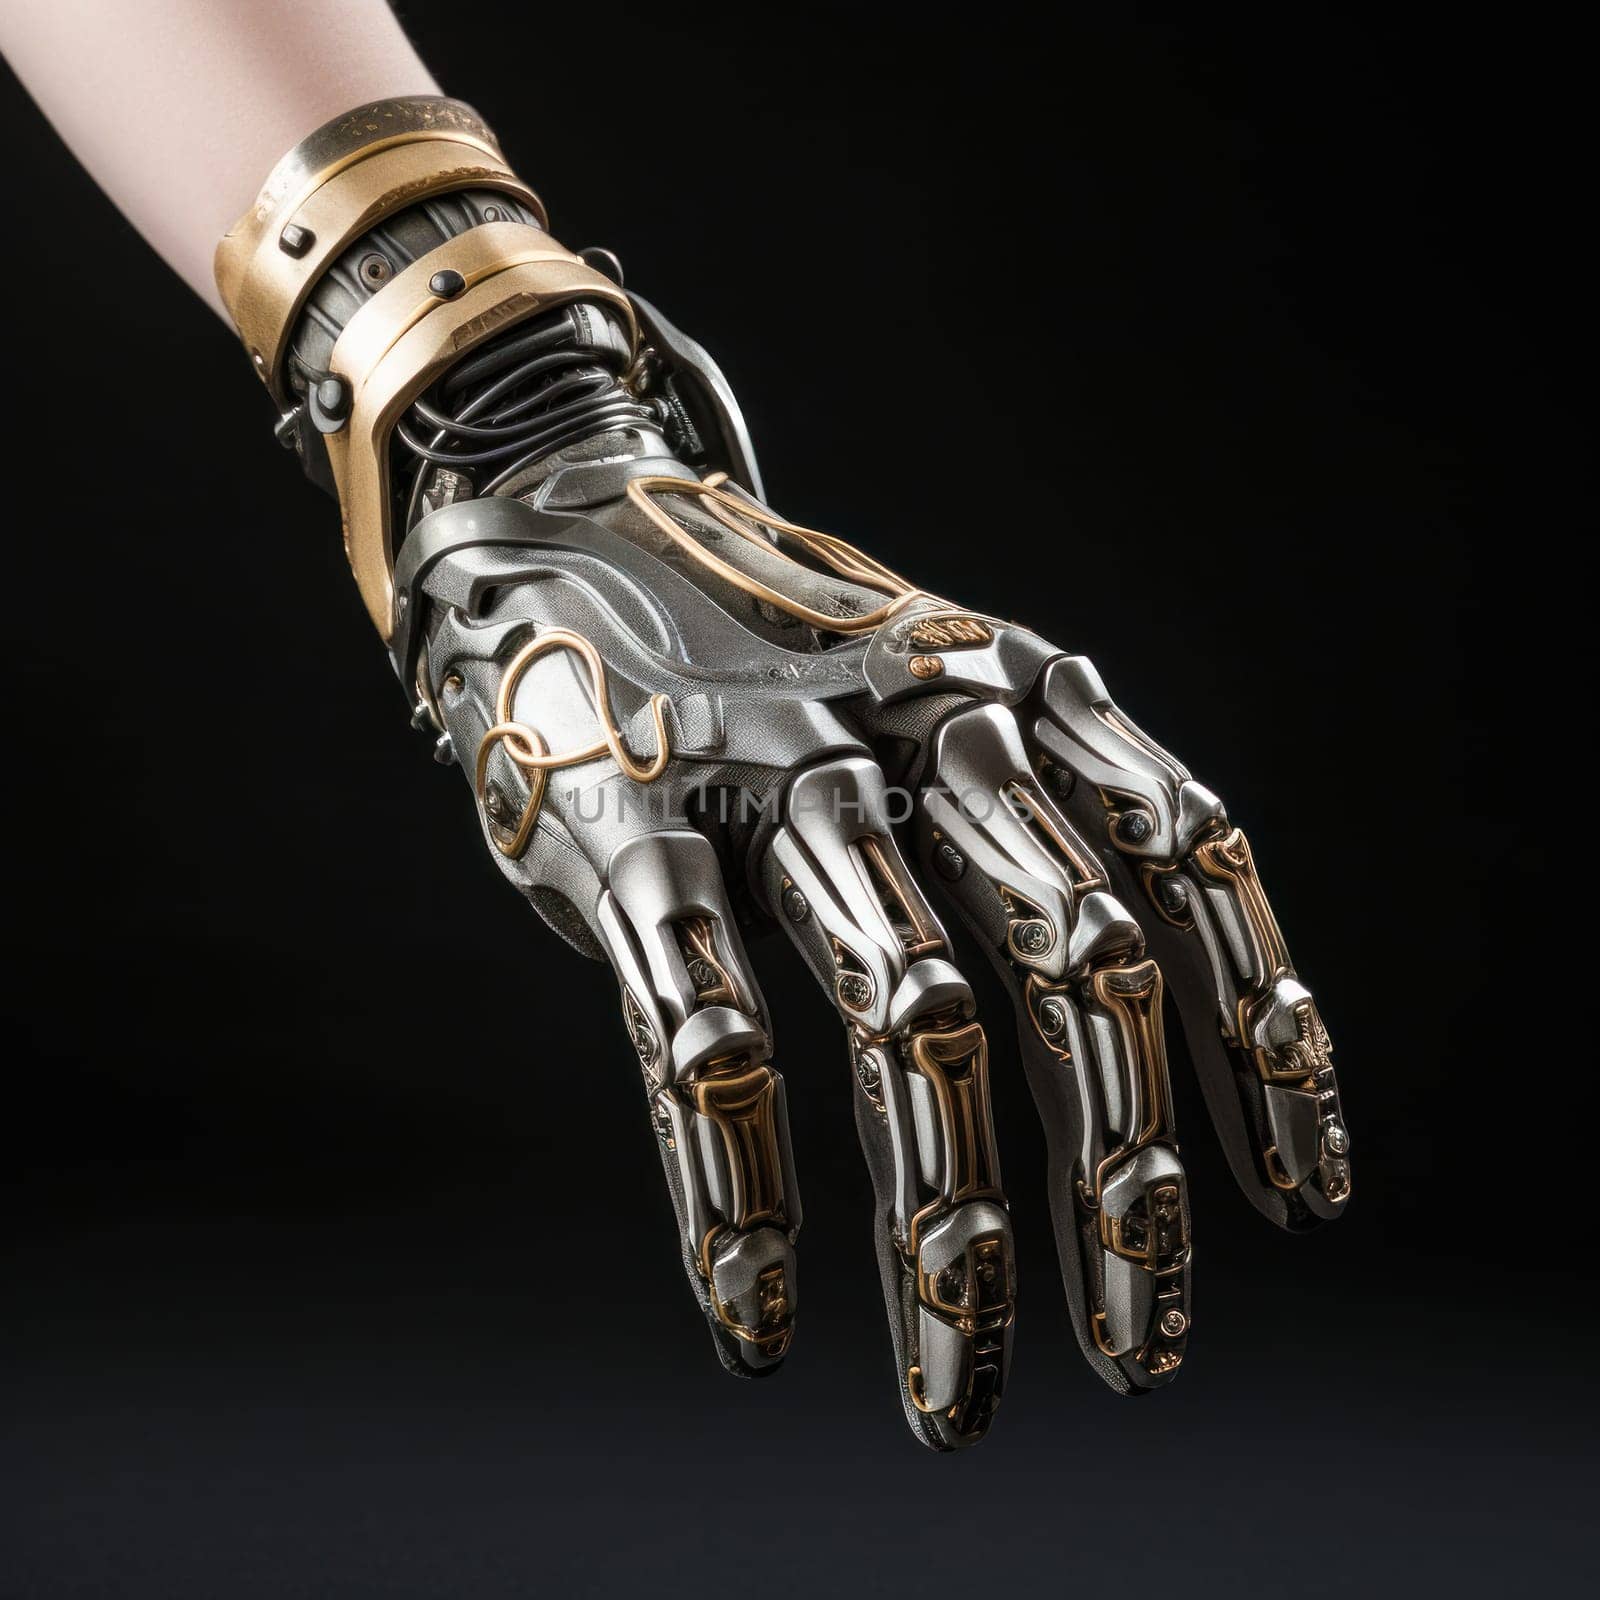 Robotic Hand, Human-Machine Combination, Hand Prosthesis by Yurich32